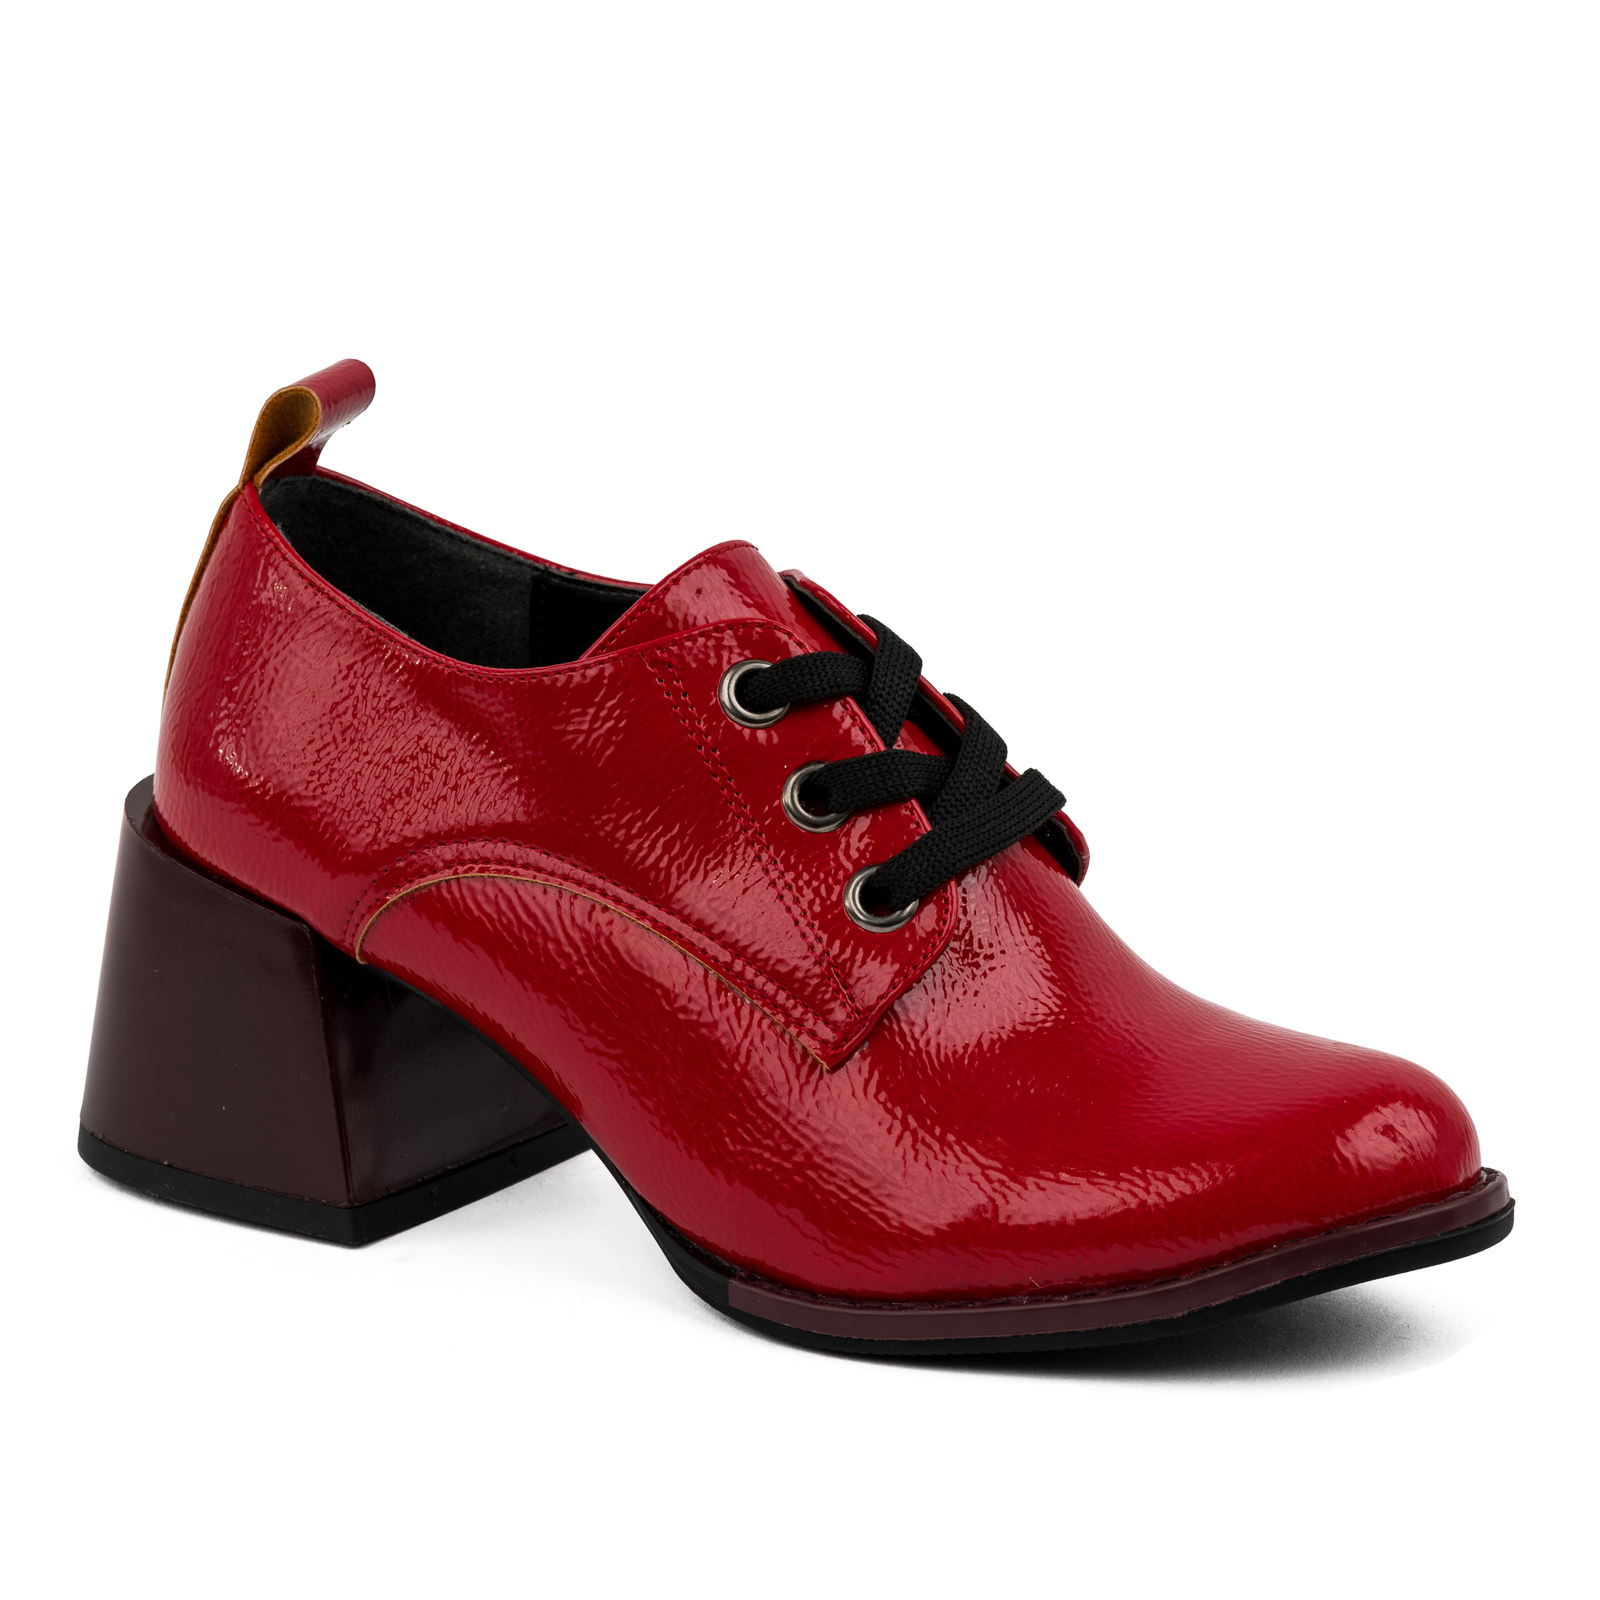 PATENT LACE UP SHOES WITH MAROON HEEL - RED